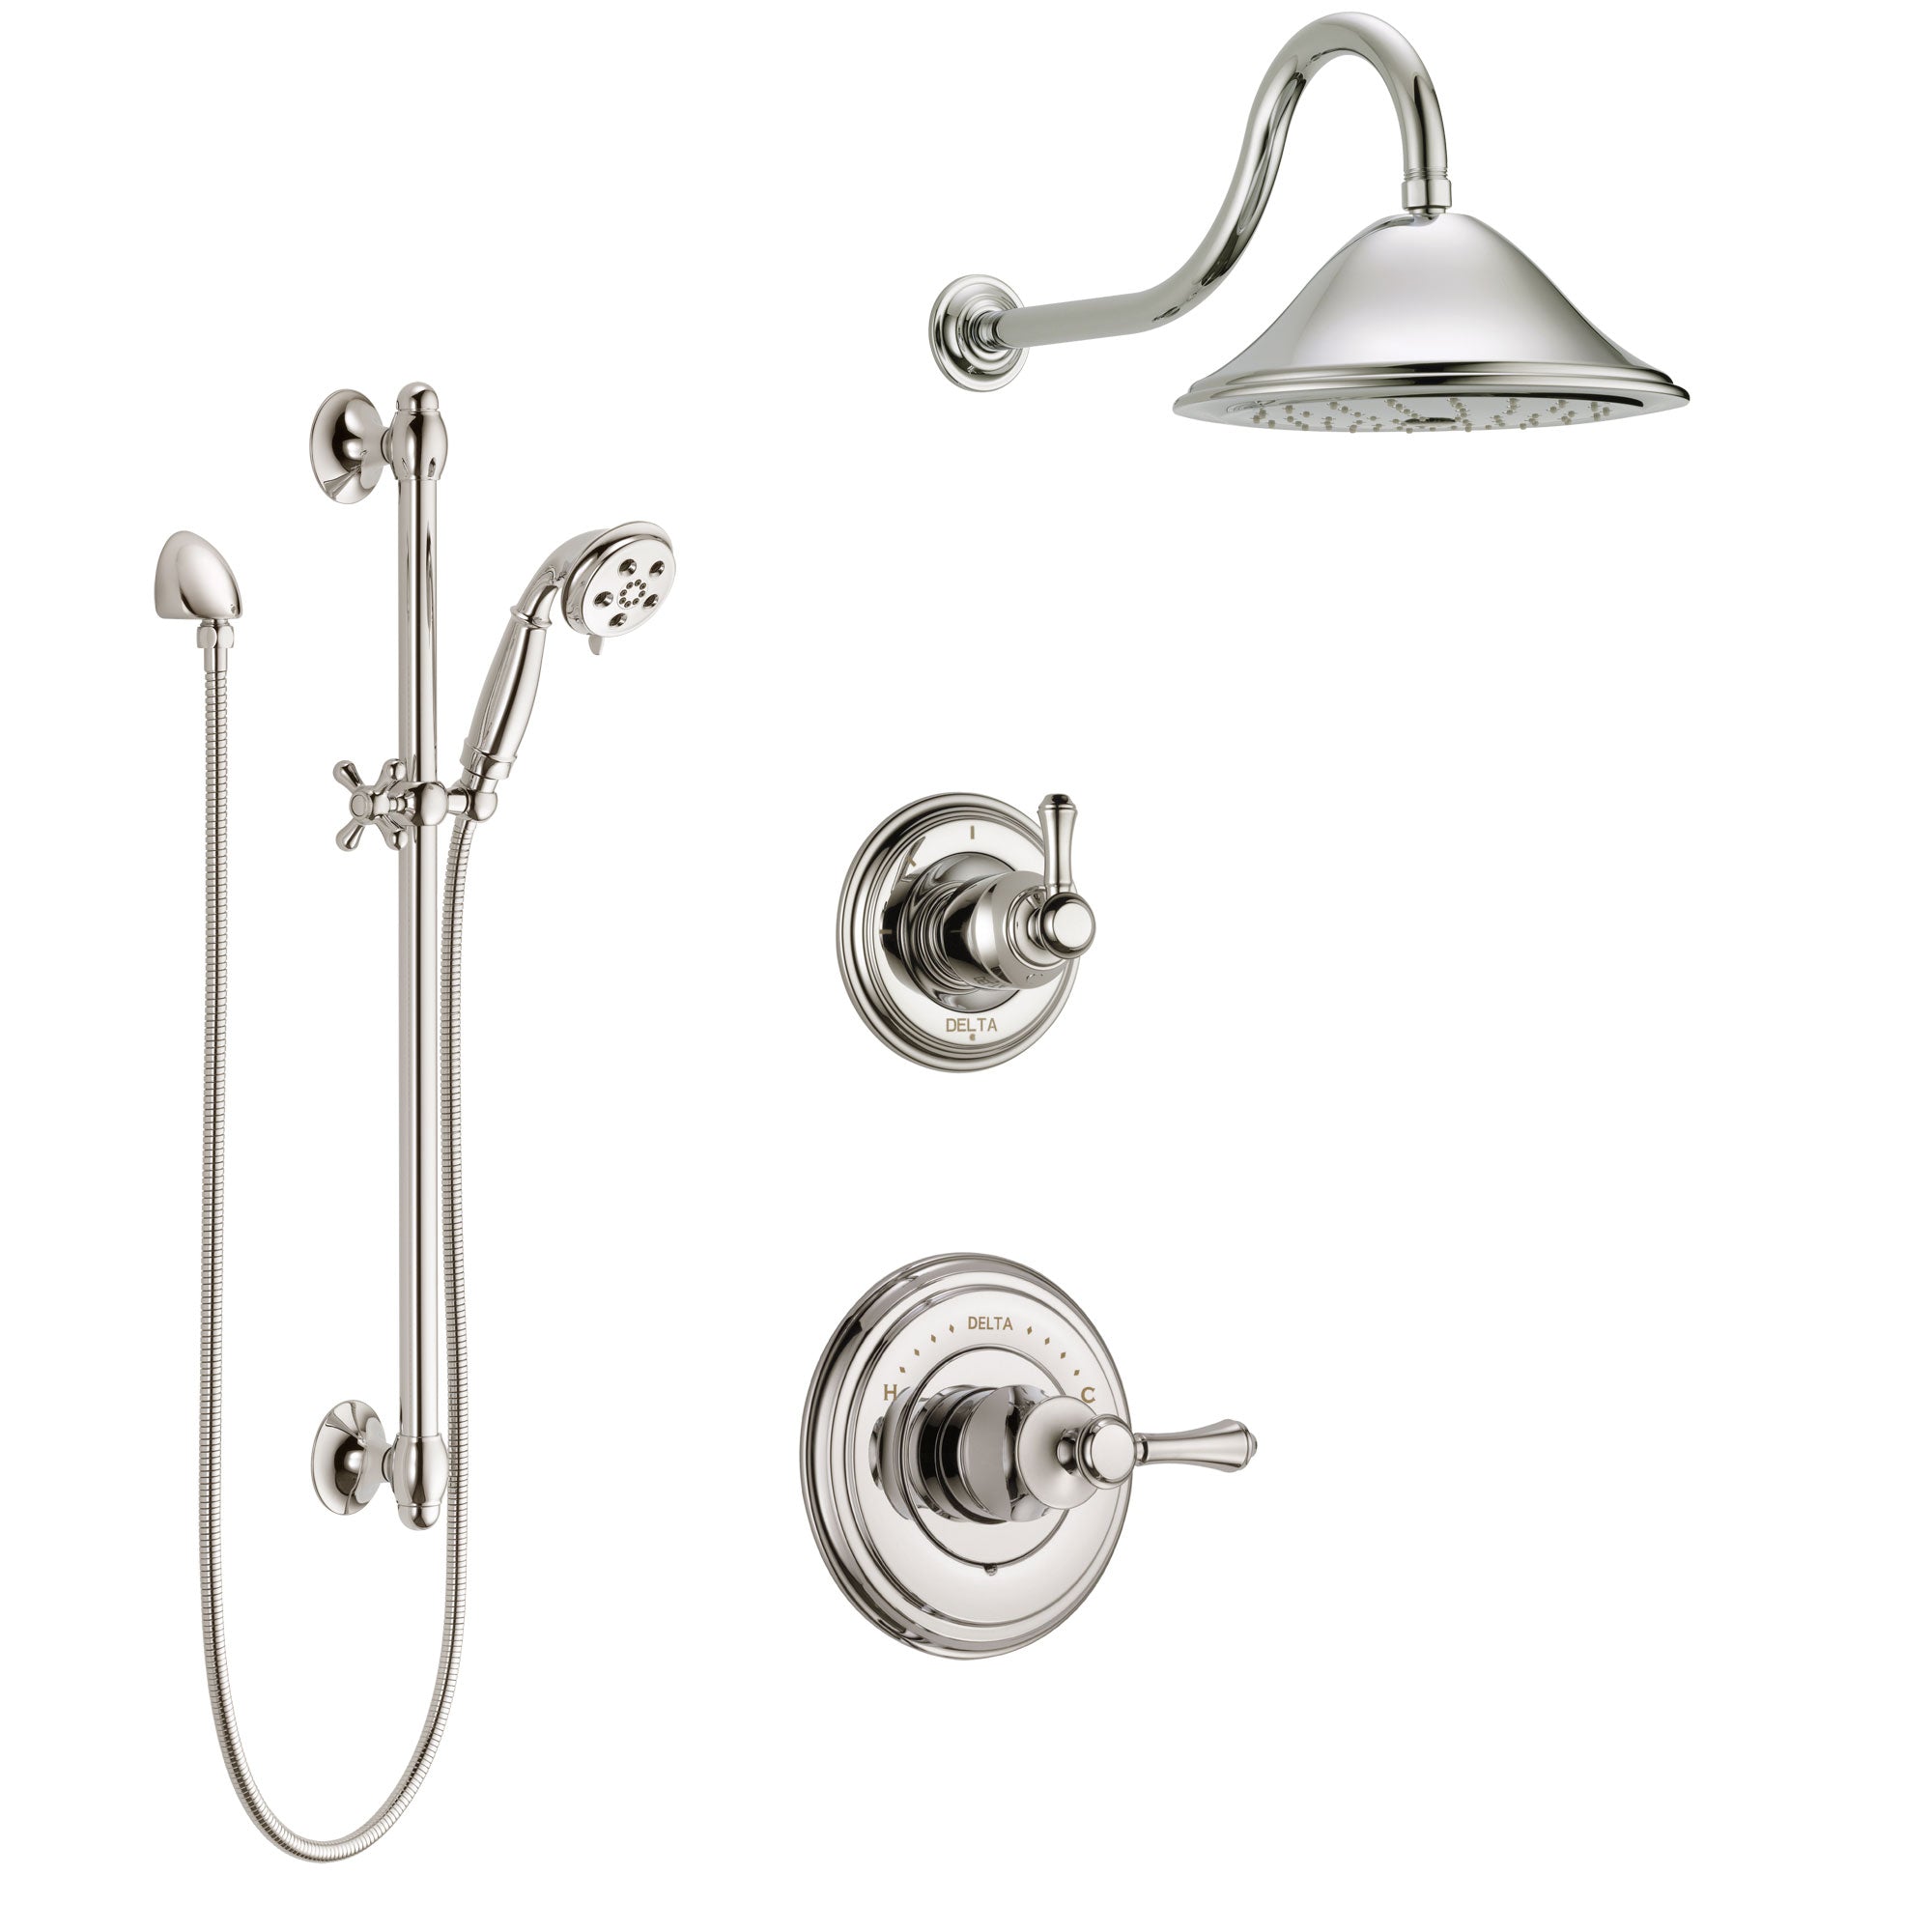 Delta Cassidy Polished Nickel Finish Shower System with Control Handle, 3-Setting Diverter, Showerhead, and Hand Shower with Slidebar SS14972PN2